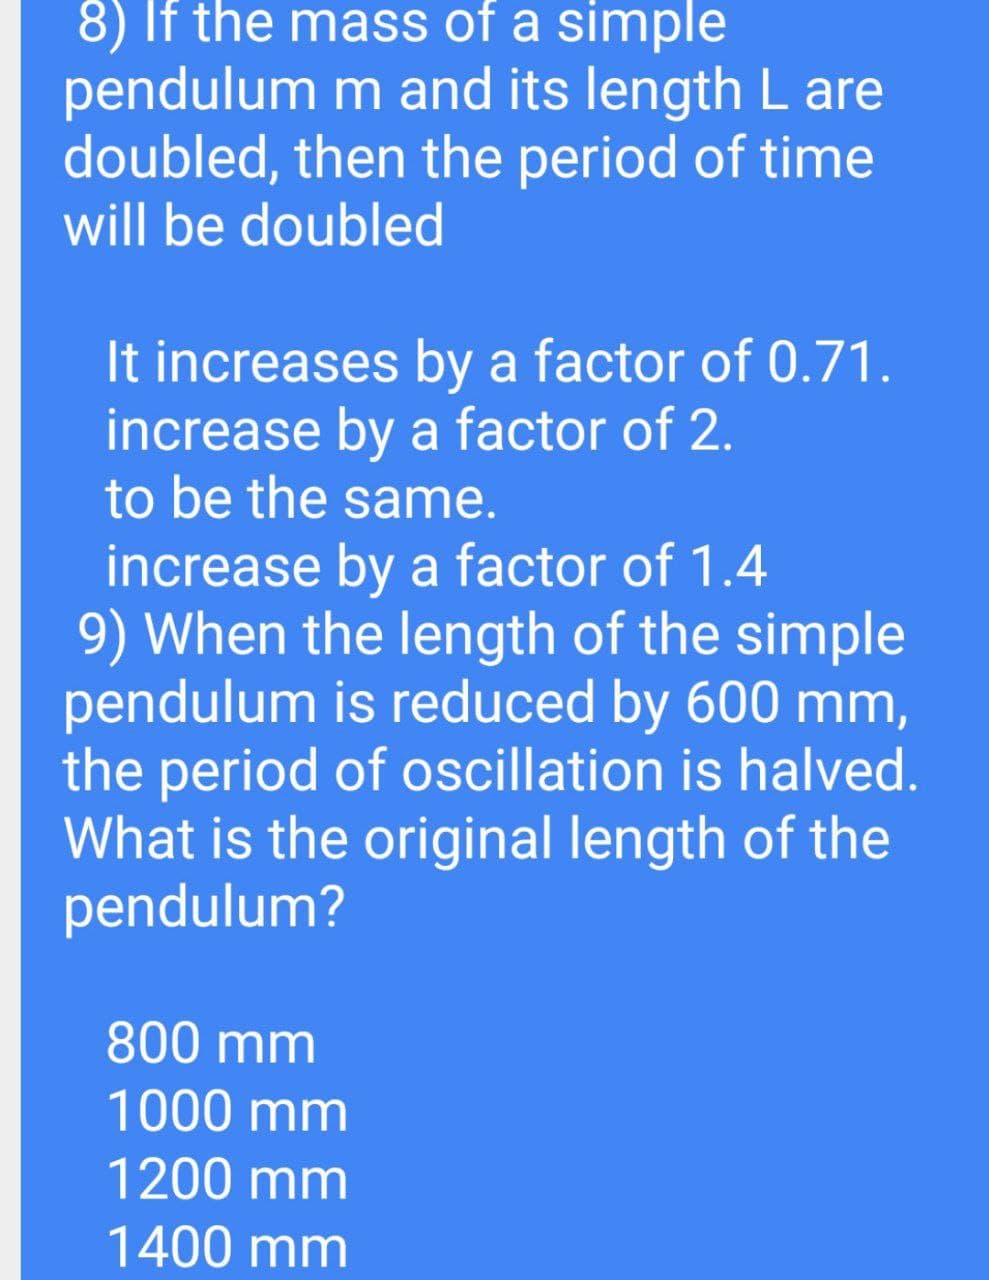 8) If the mass of a simple
pendulum m and its length L are
doubled, then the period of time
will be doubled
It increases by a factor of 0.71.
increase by a factor of 2.
to be the same.
increase by a factor of 1.4
9) When the length of the simple
pendulum is reduced by 600 mm,
the period of oscillation is halved.
What is the original length of the
pendulum?
800 mm
1000 mm
1200 mm
1400 mm
